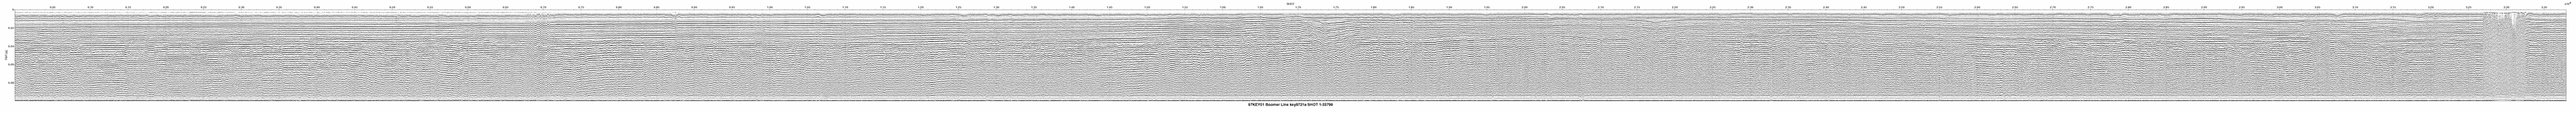 Thumbnail GIF image of the seismic trackline key9721a, with a hotlink to the more detailed, larger JPG image.